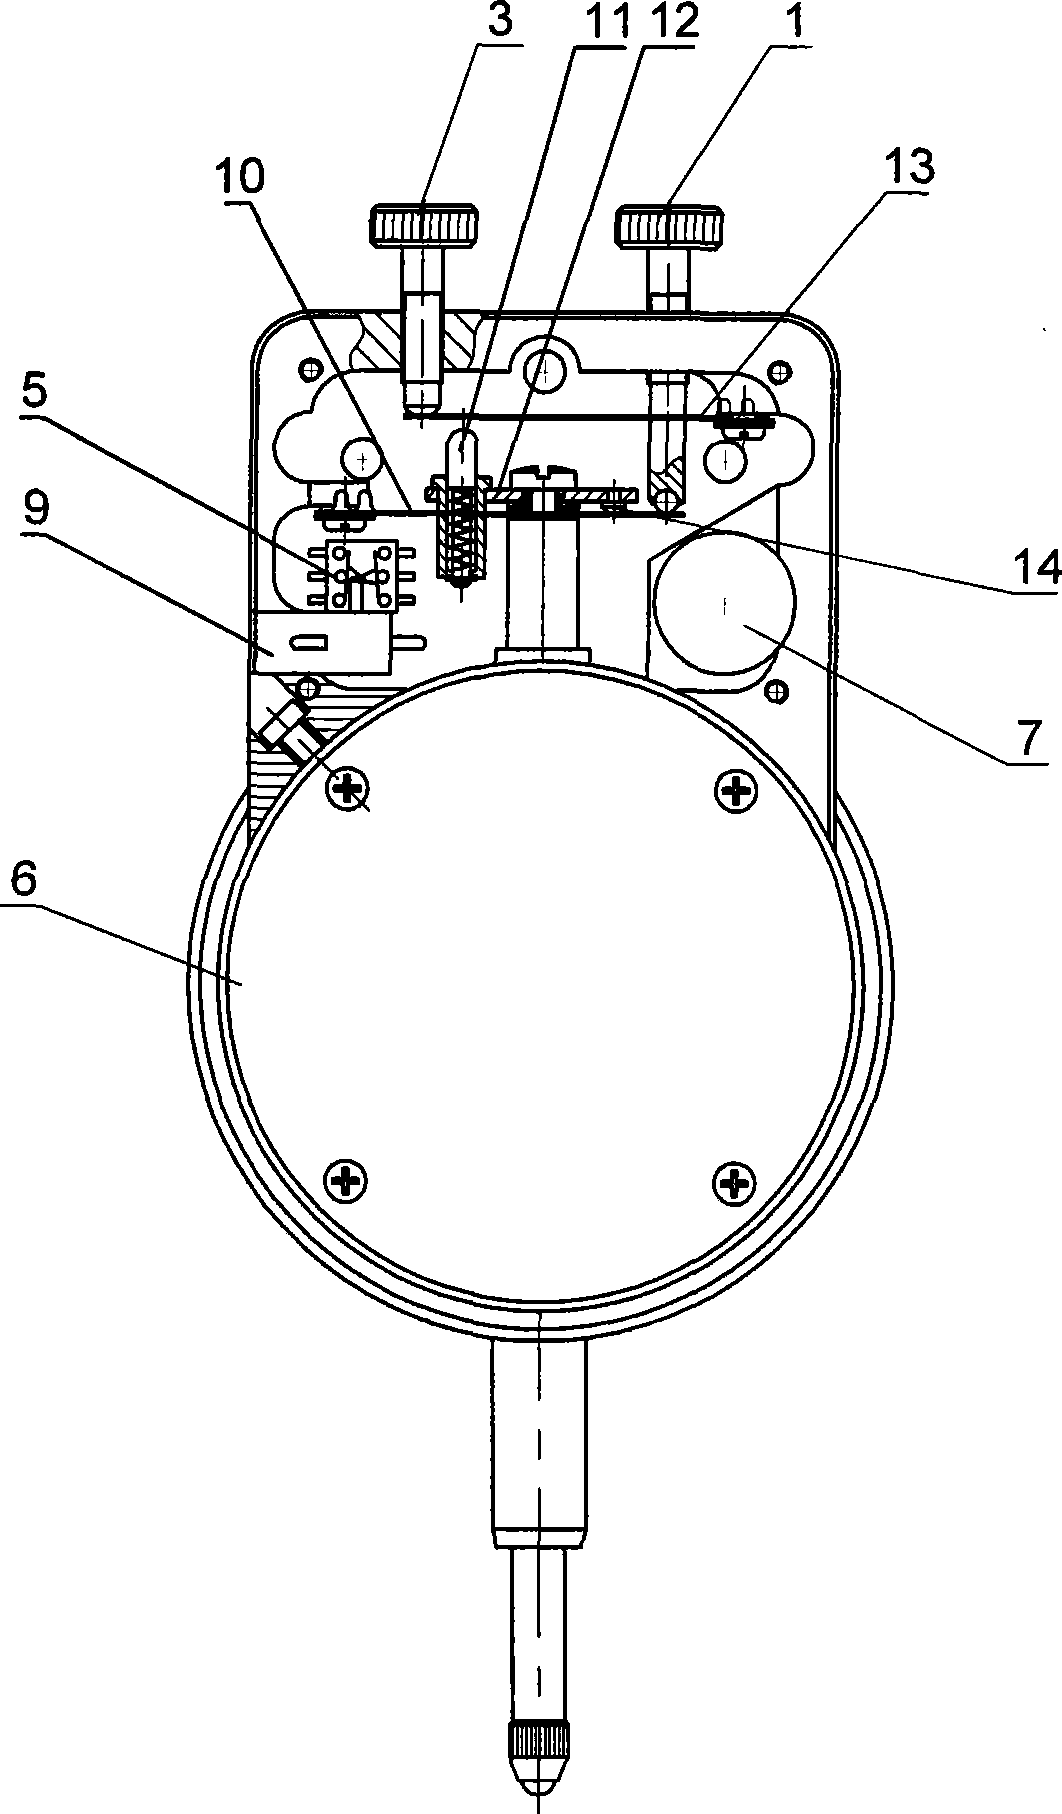 Double-boundary electric contact indicator